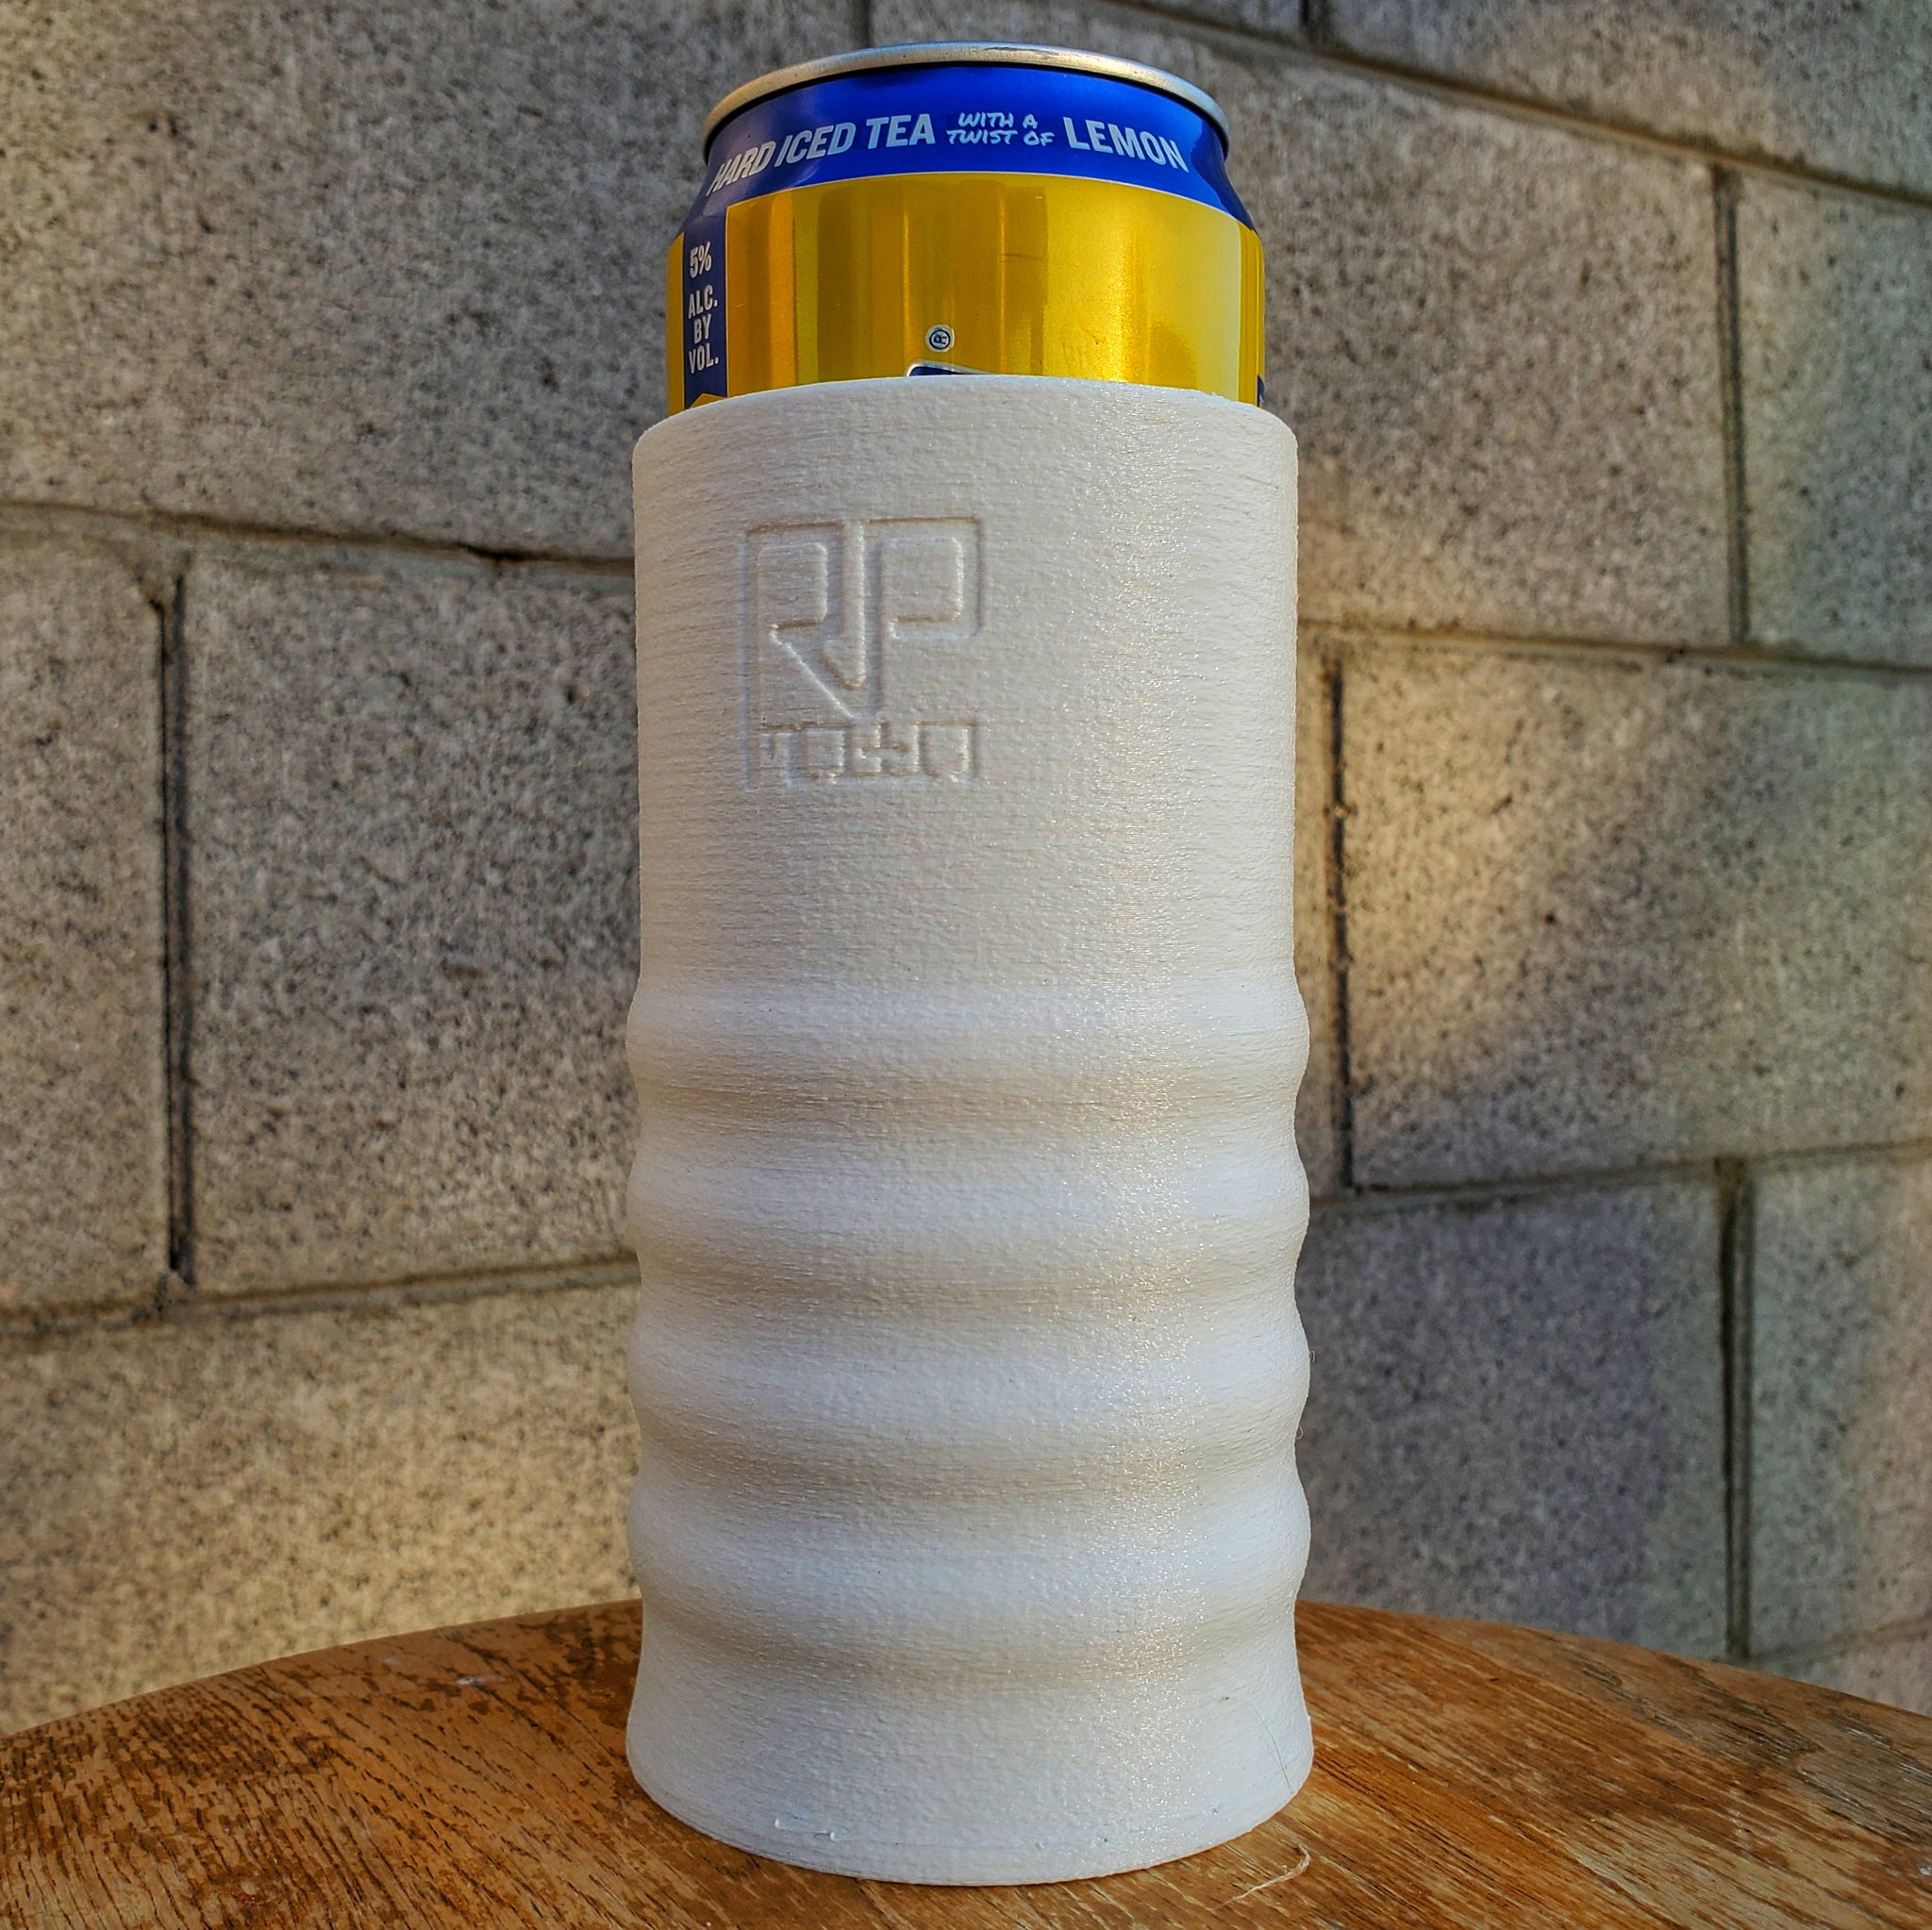 The Over-Engineered Koozie (All Sizes) – RP Moto